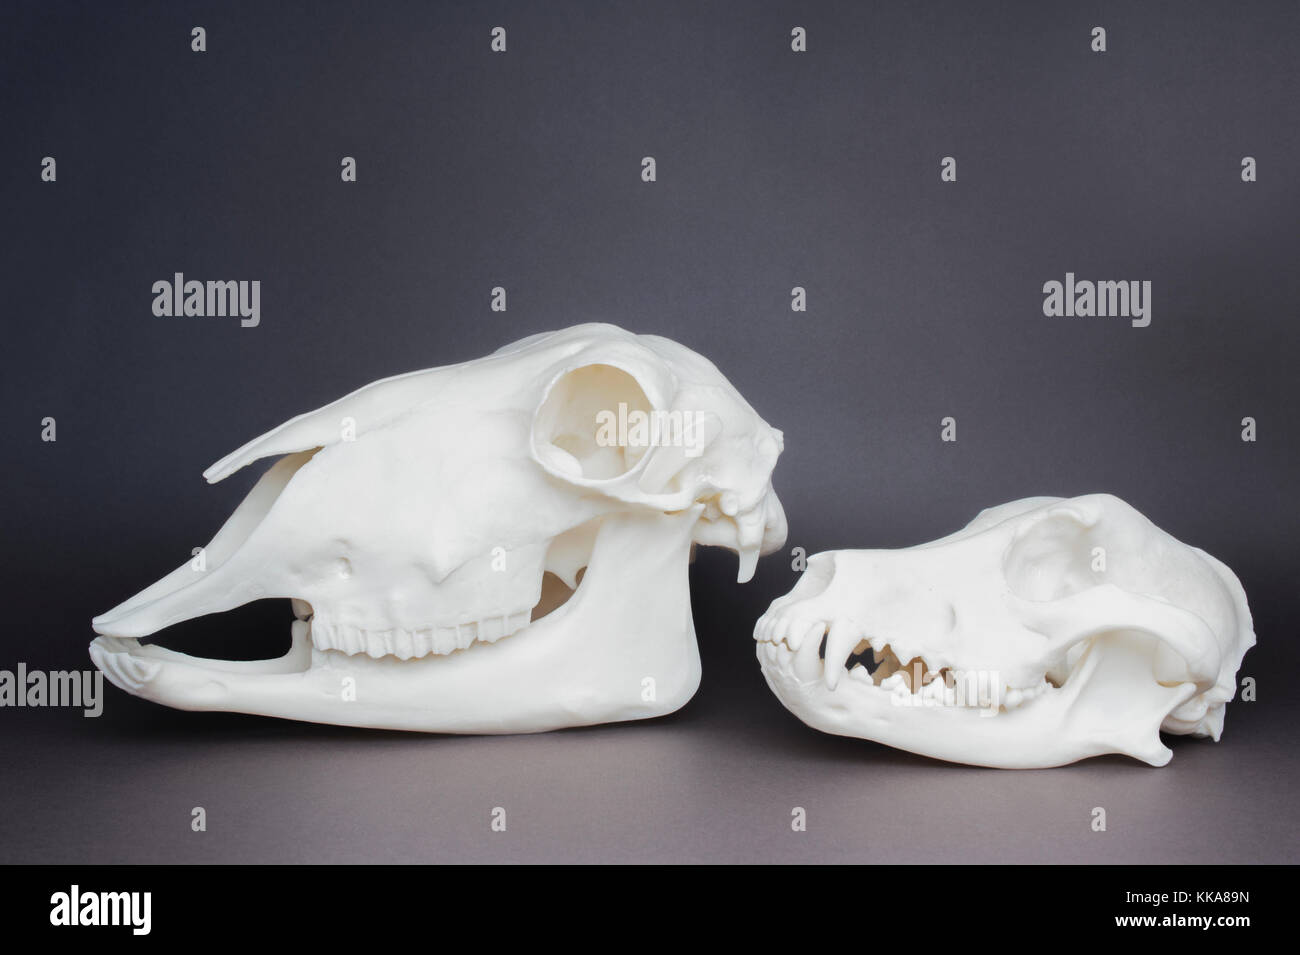 Dog and sheep skull, (carnivore and herbivore skull comparison), showing teeth and jaw structure Stock Photo